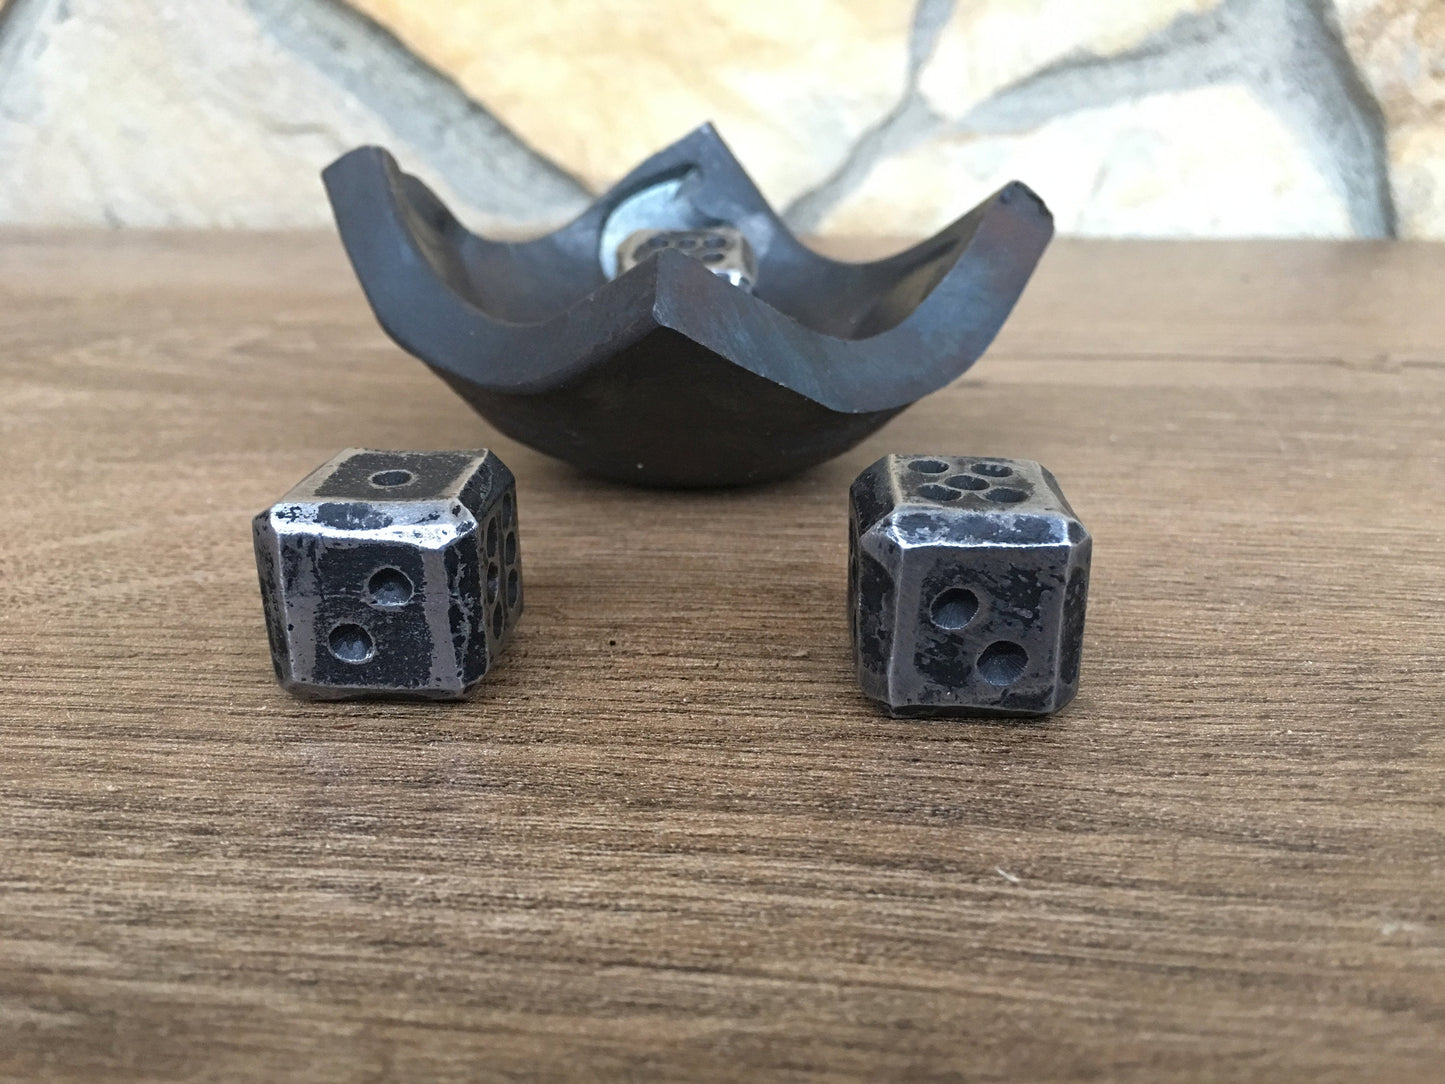 Iron dices, set of dices, iron dice, steel dice, custom dice, pair of dices,iron gifts, axe,gaming dice,role playing games,tabletop dice box